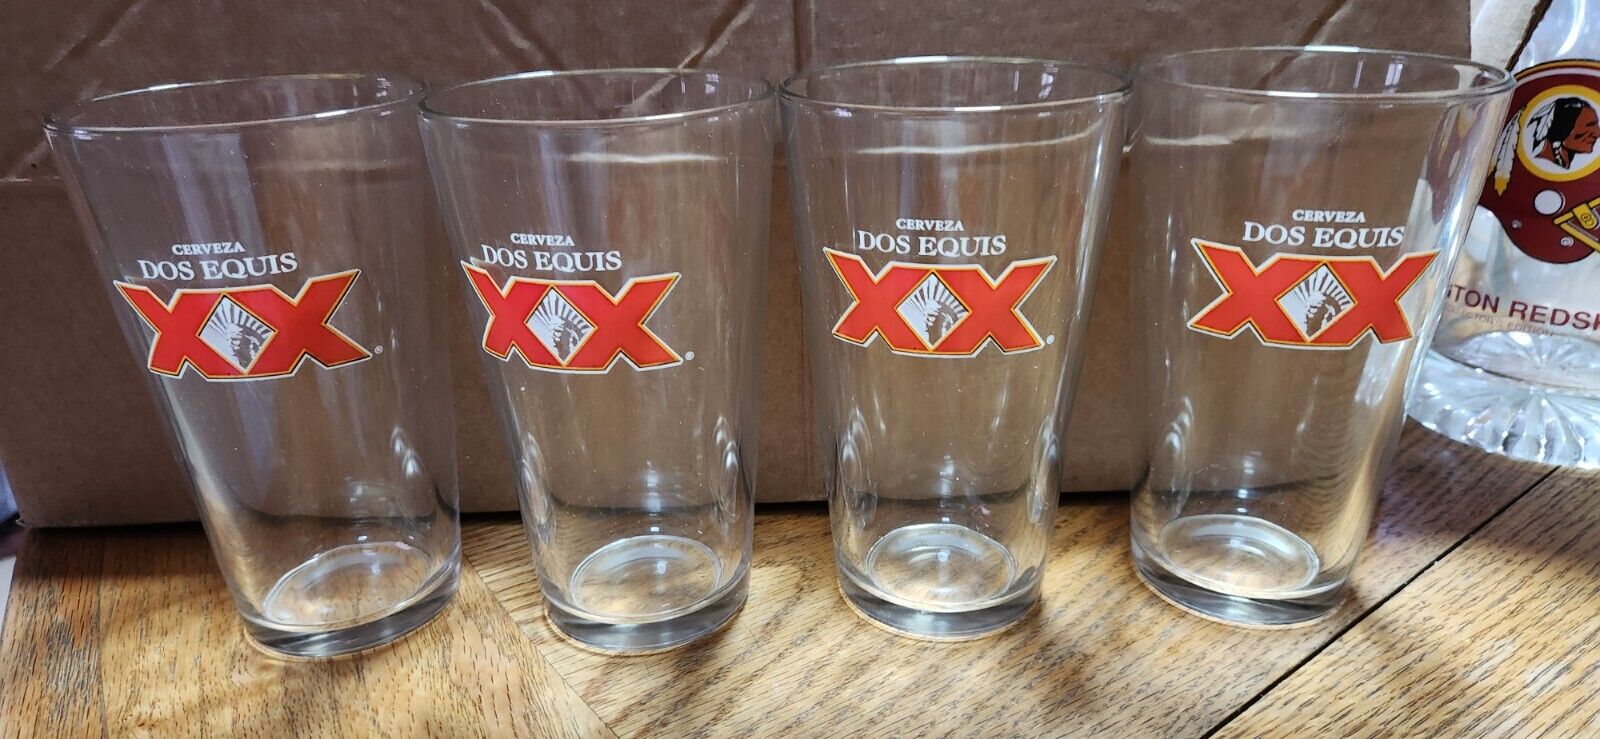 Set of 4 Dos Equis Mexican Beer Glass Embossed XX’s Established 1897 16oz .5l